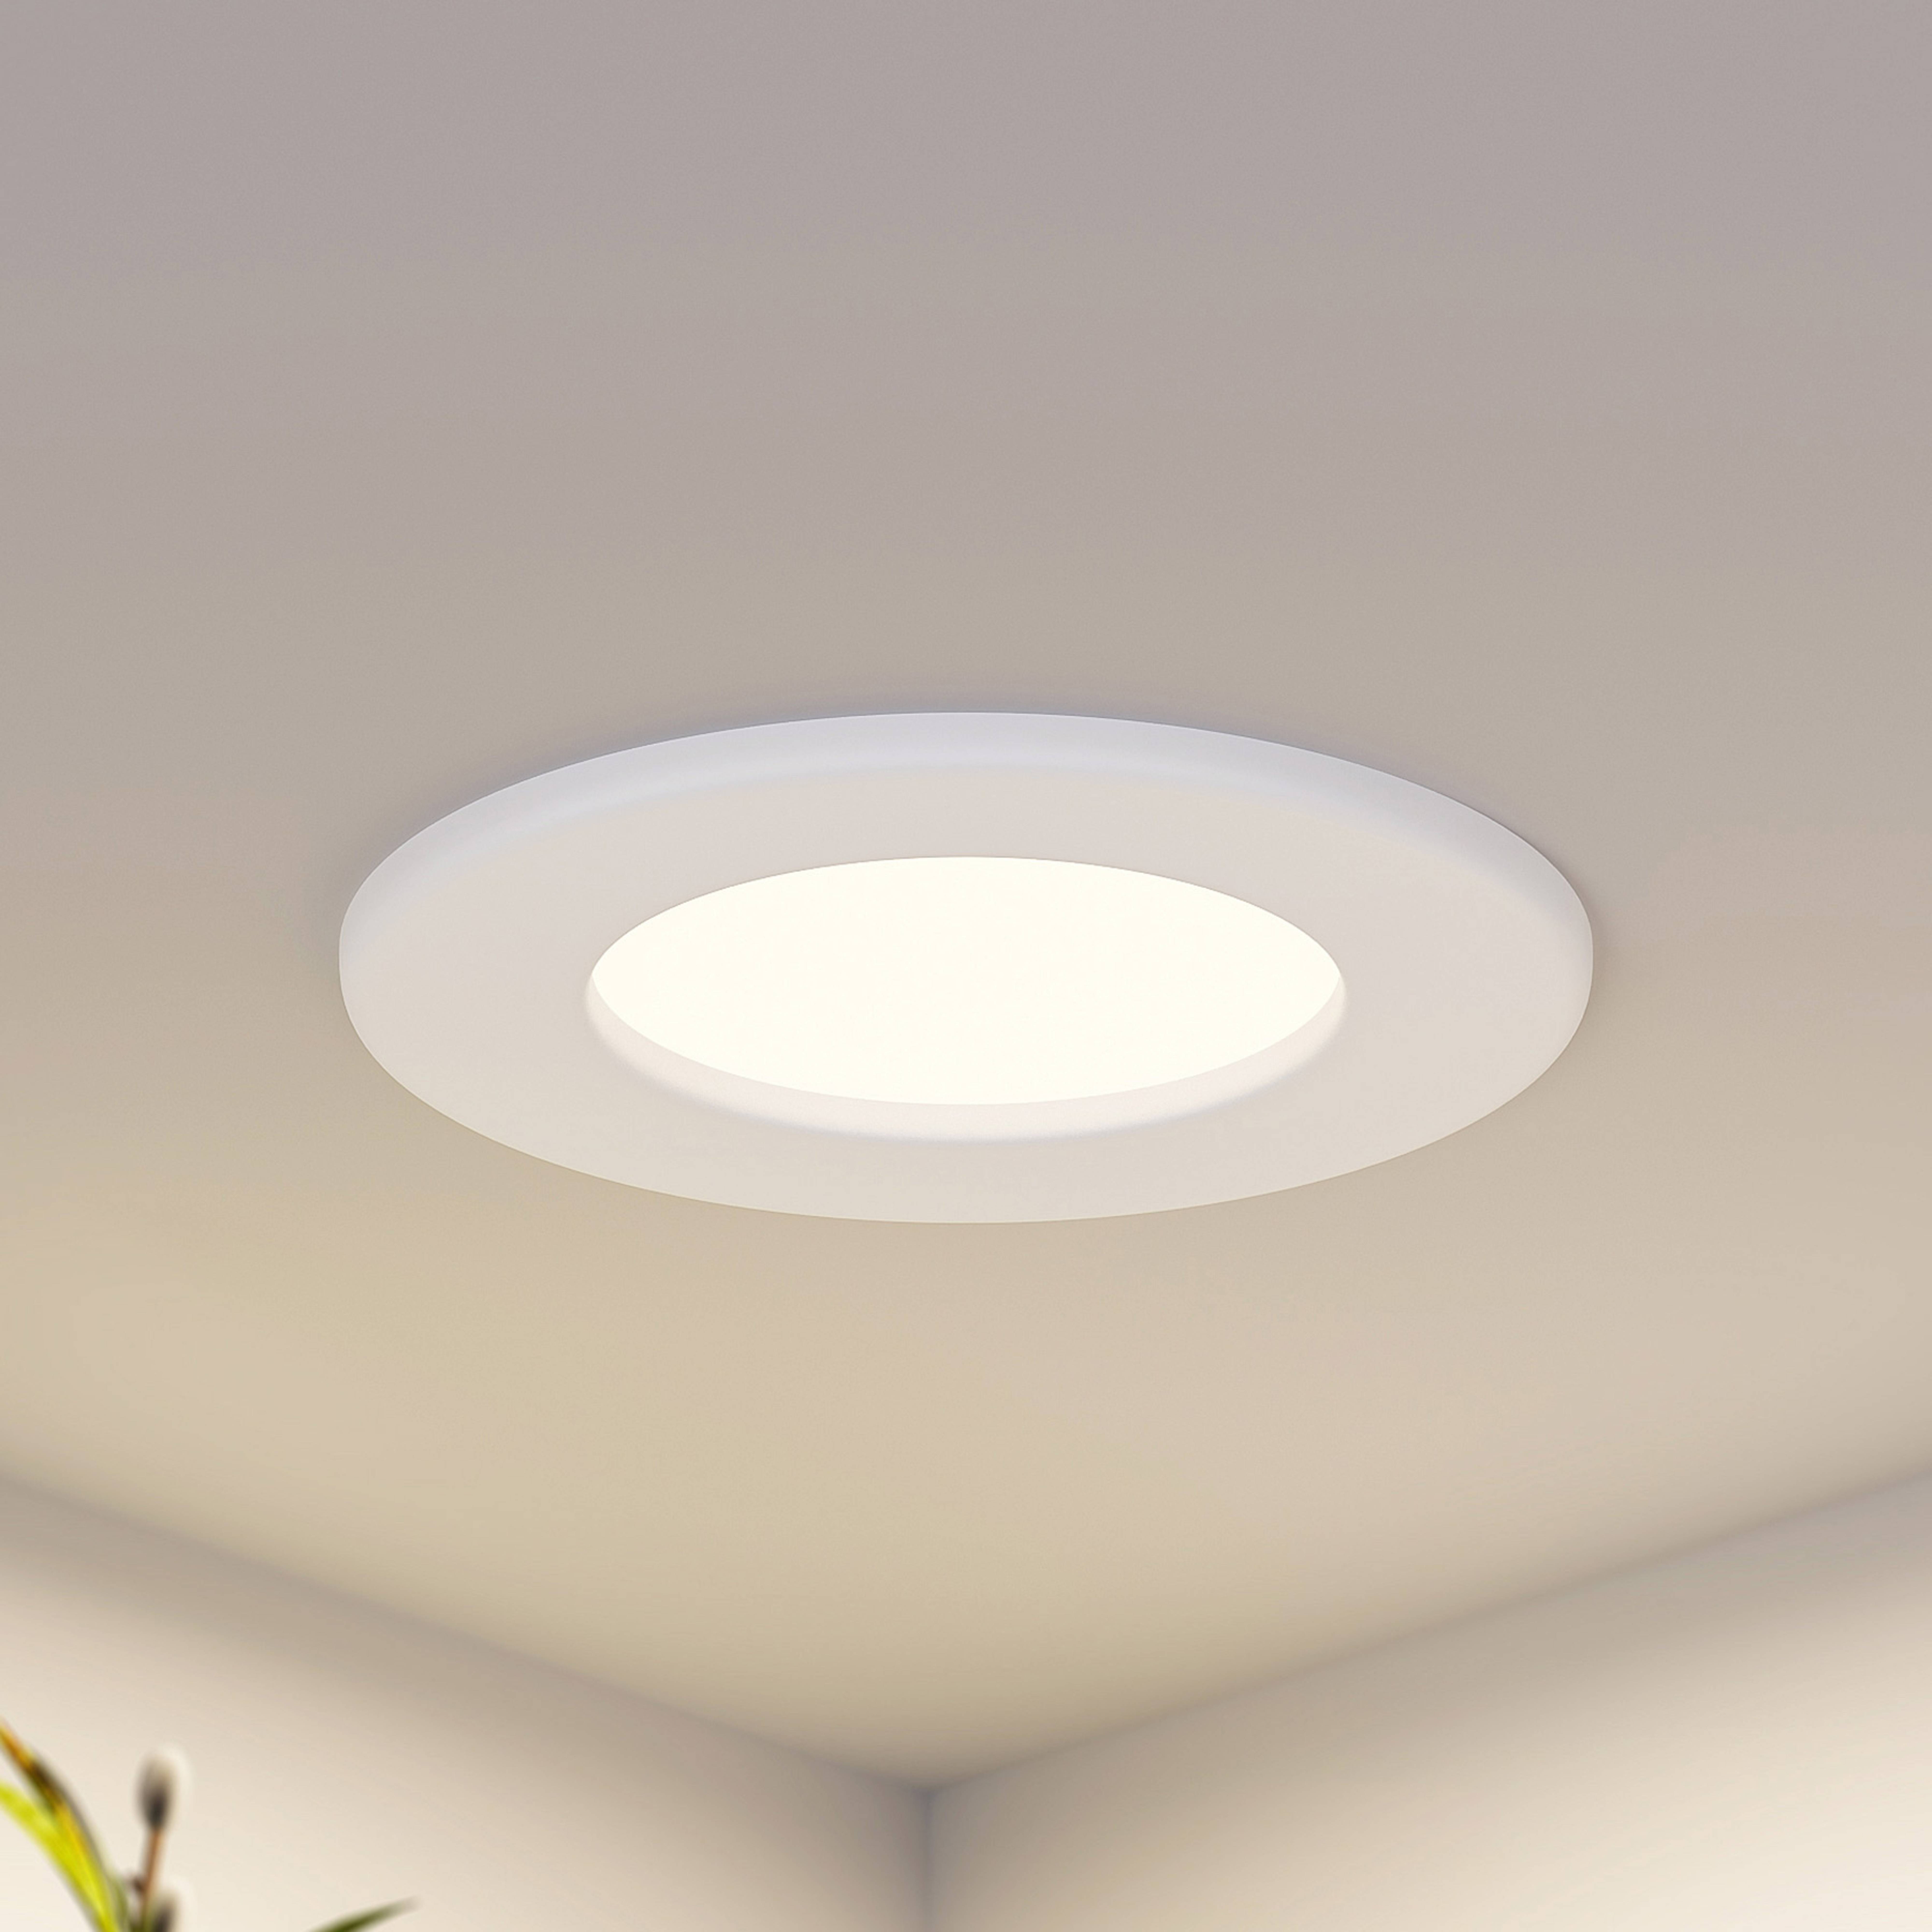 Prios LED recessed light Cadance, white, 11.5 cm, dimmable